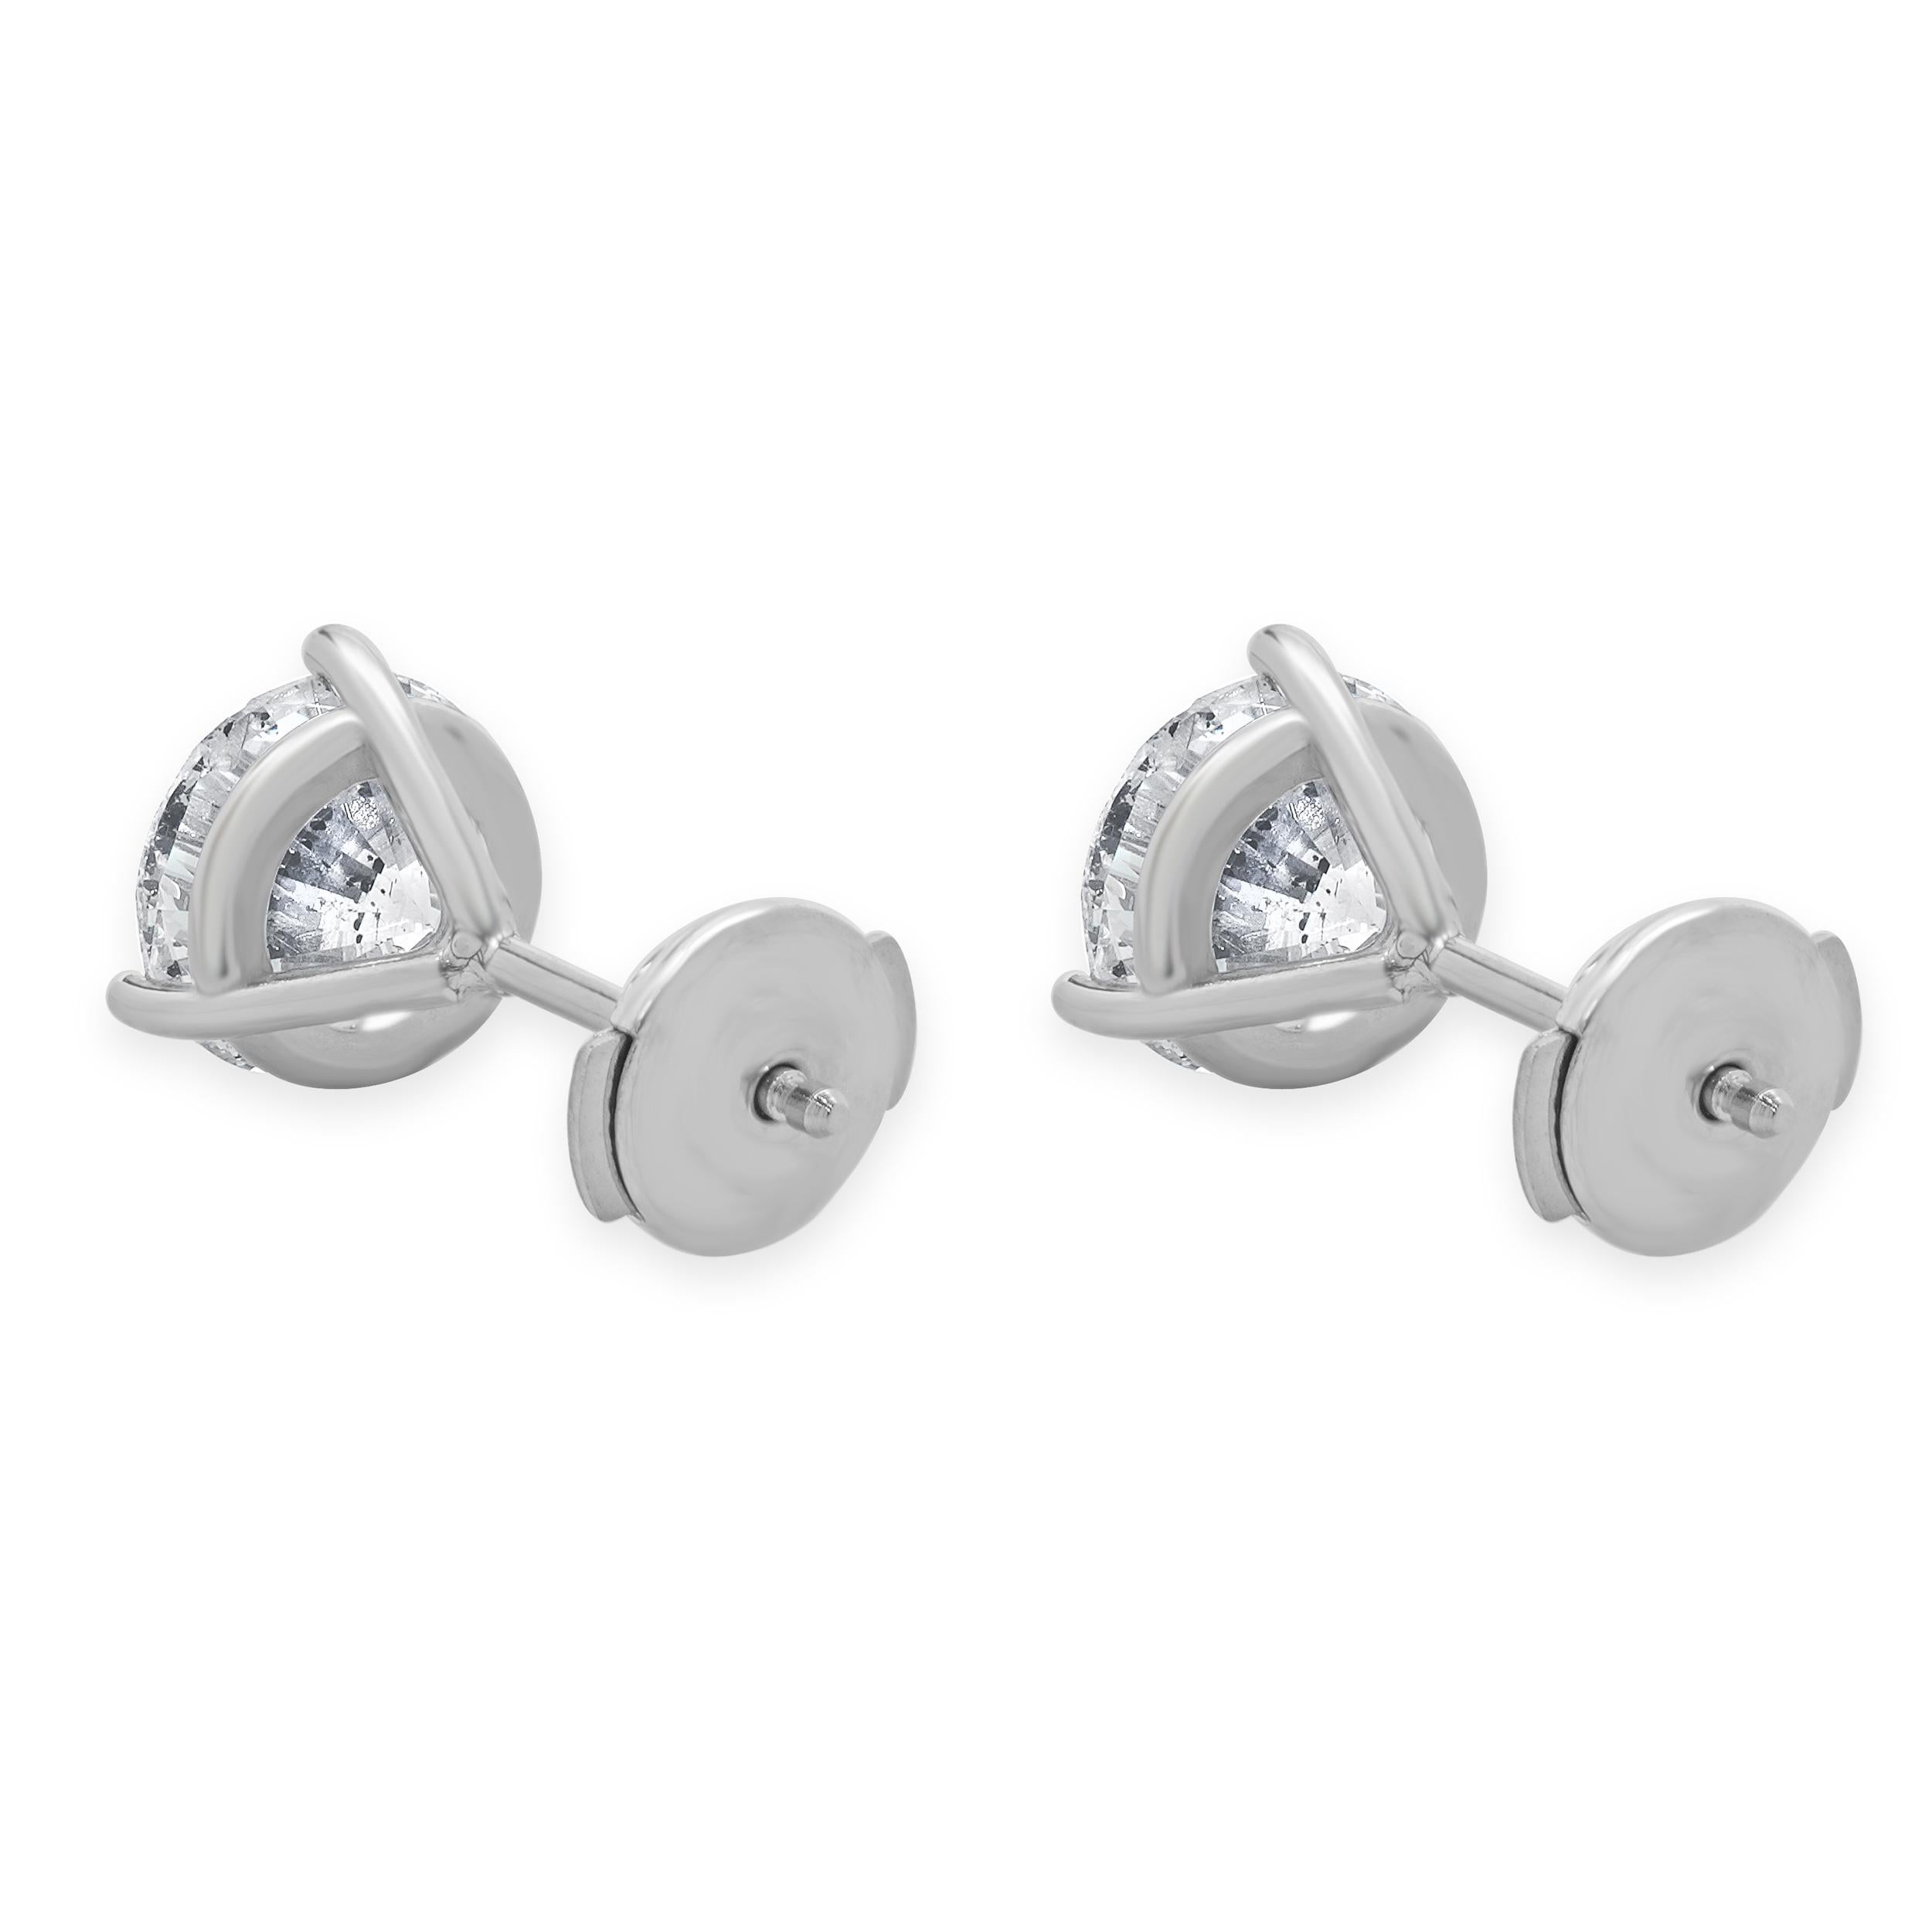 Material: 14K white gold
Diamonds: 1 round brilliant cut = 1.55ct
Color: G
Clarity: I1
Diamond: 1 round brilliant cut = 1.65ct
Color: G
Clarity: I1
Dimensions: earrings measure approximately 8mm in diameter
Fastenings: protektor
Weight: 1.97 grams
